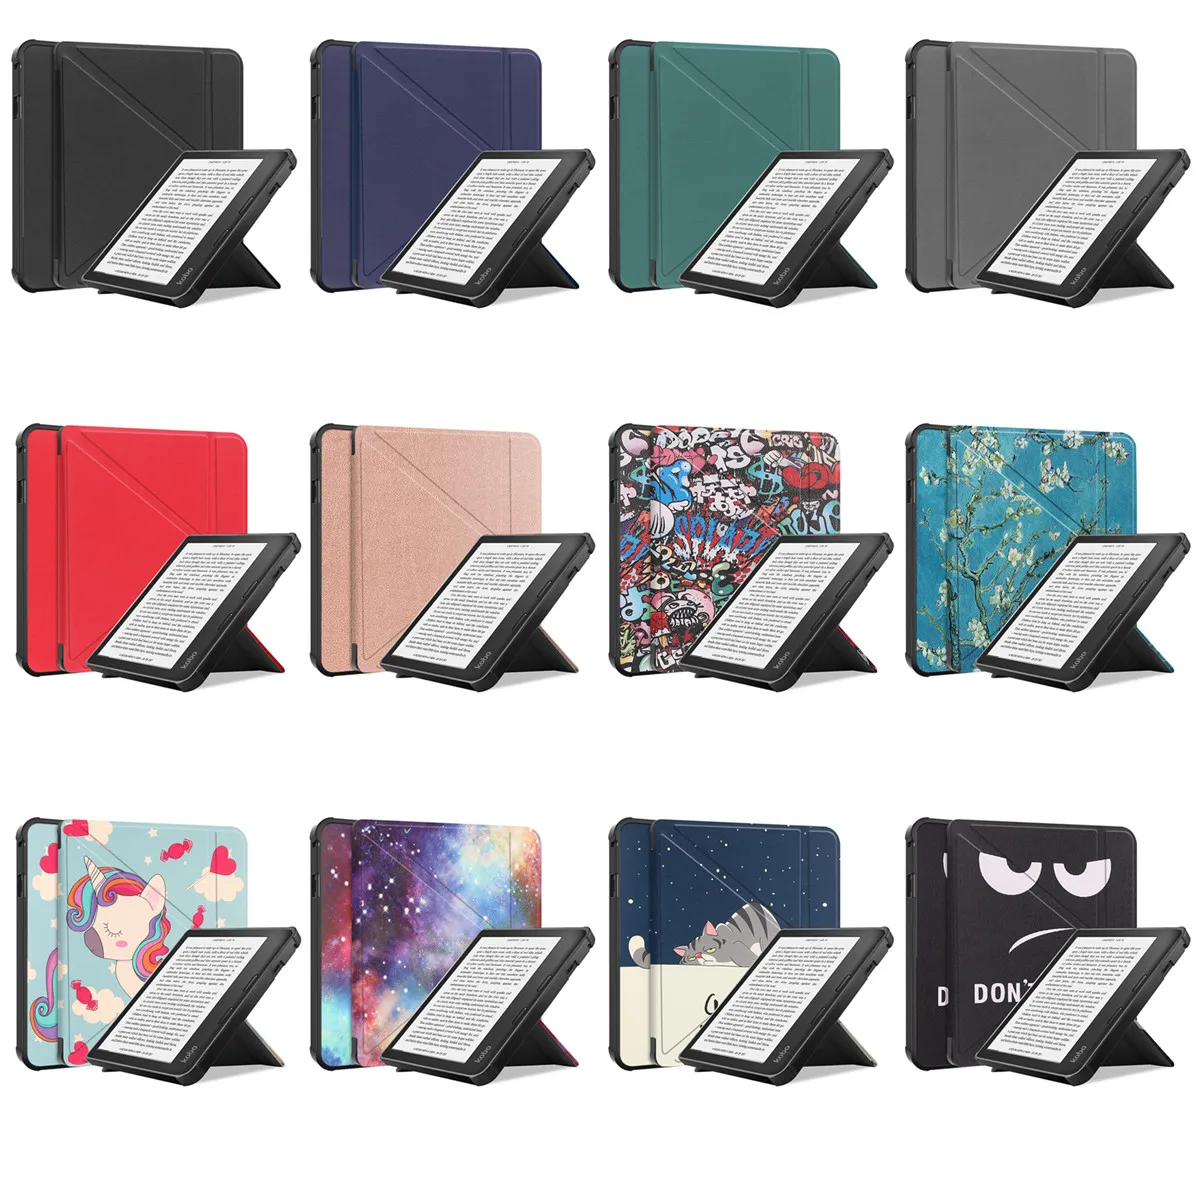 3D Paint UnicornUltra Thin and Lightweight PU Leather Protective Cover with Auto Sleep/Wake Tab Case for Kobo Sage 8 inch 2021